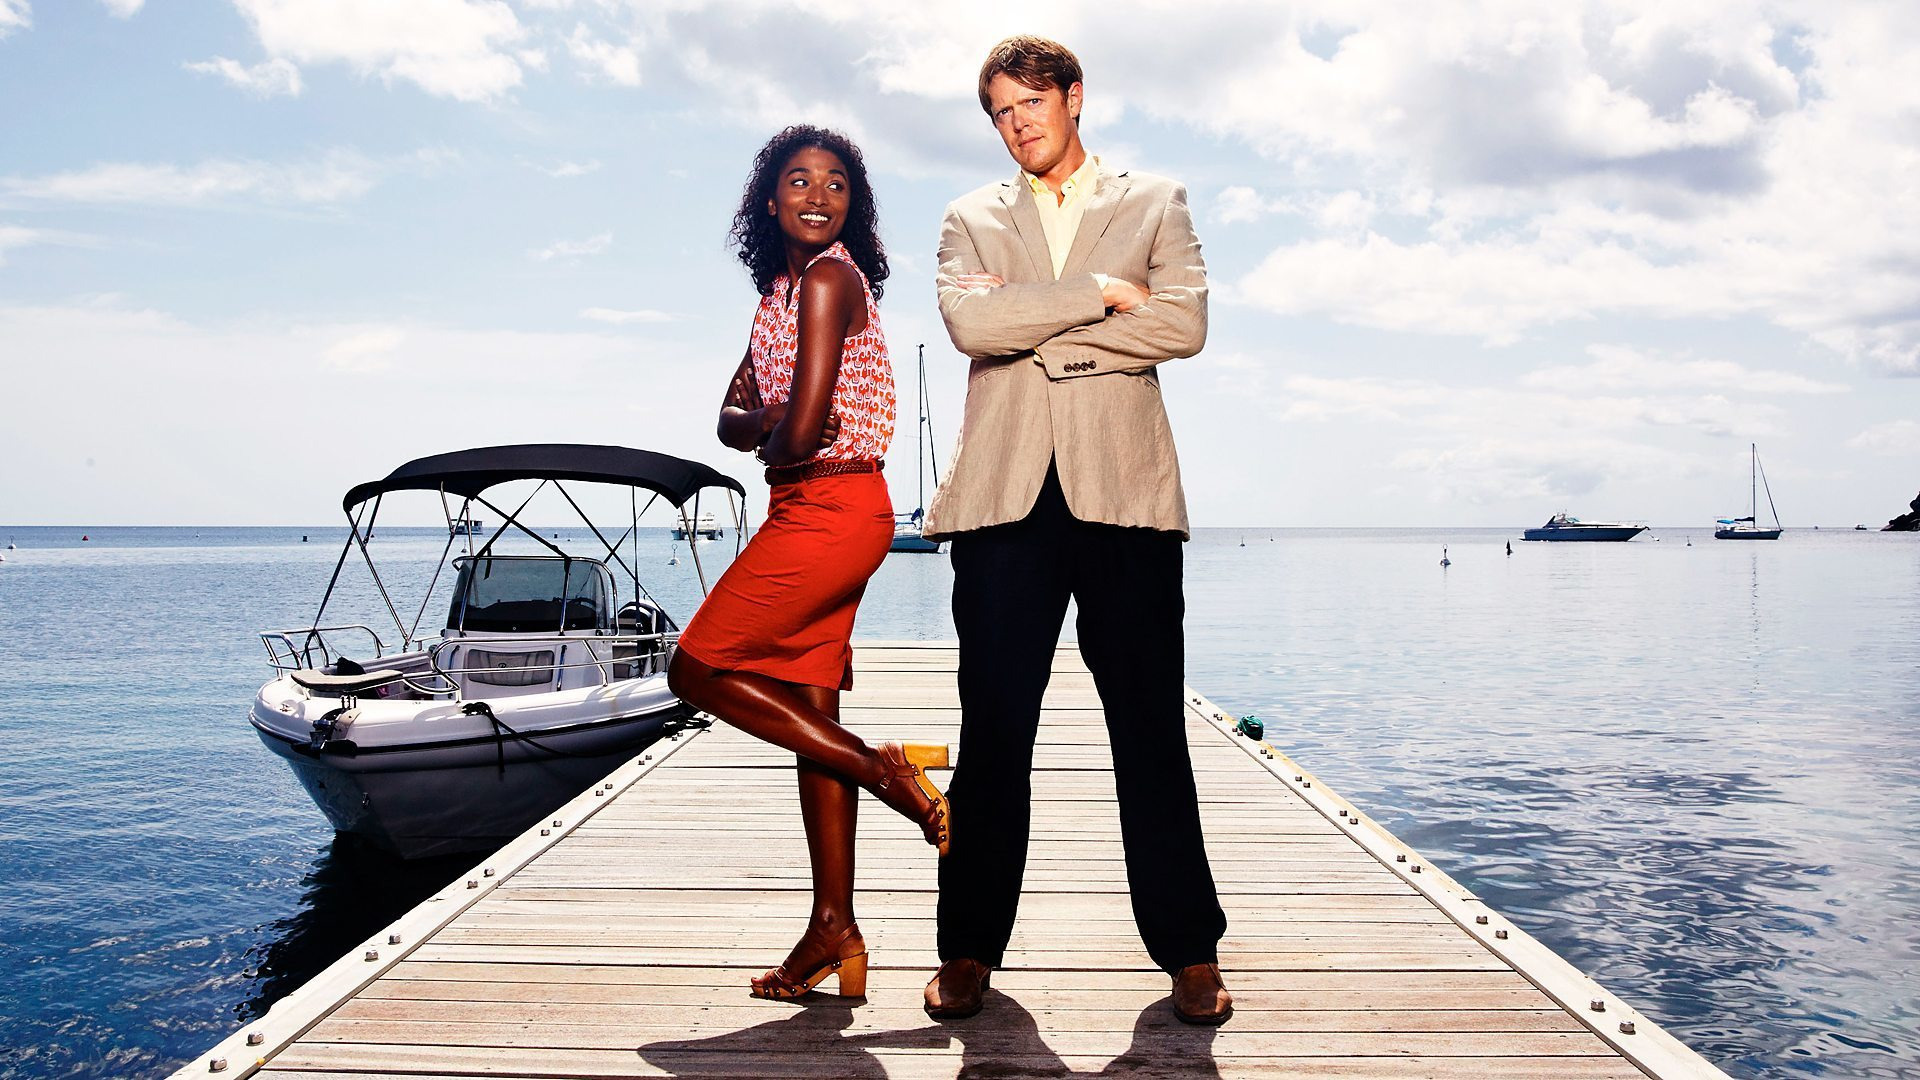 Show Death in Paradise